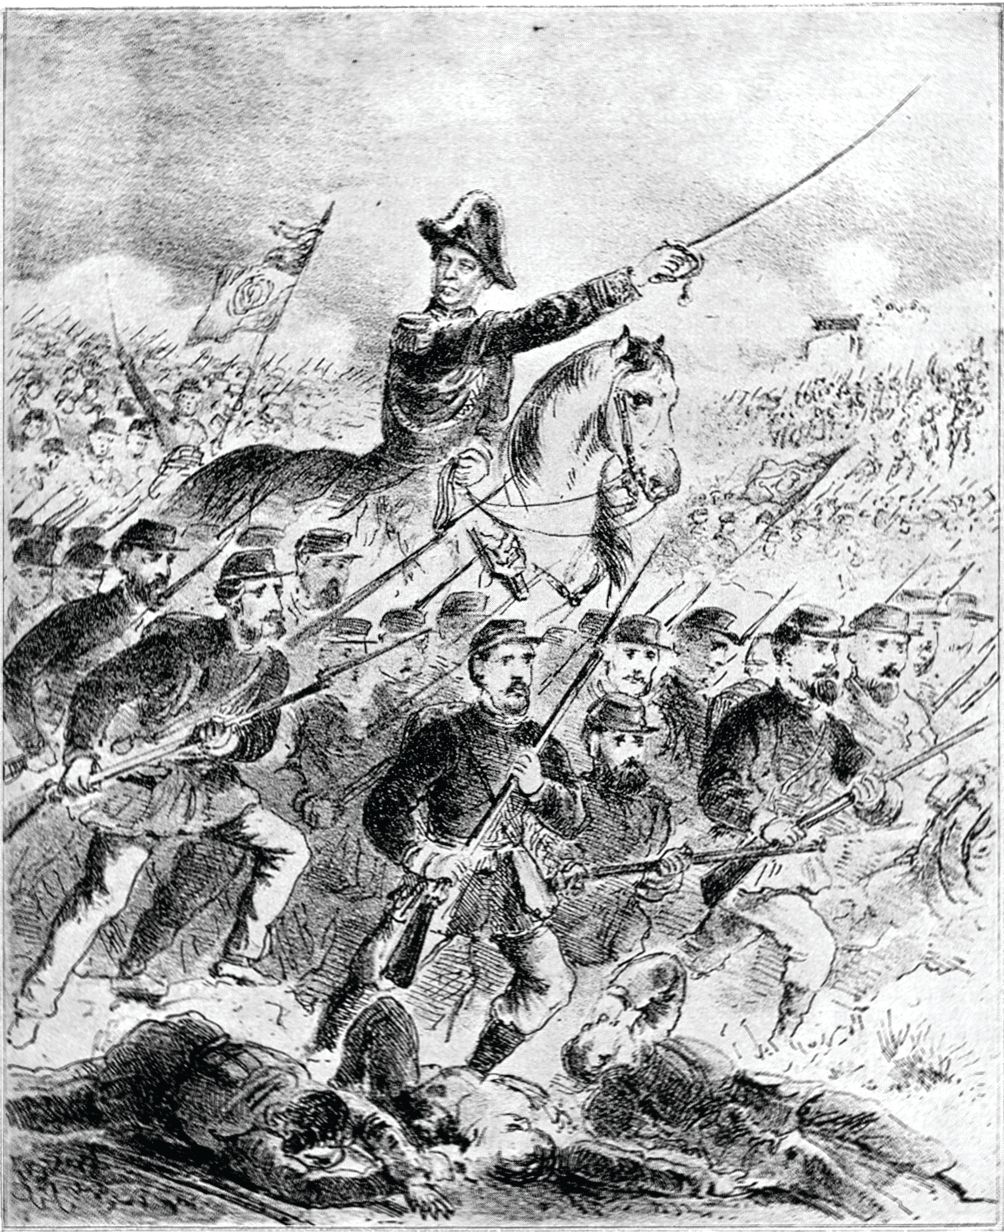 The Marquis de Caxias led the Brazilian Army to numerous victories in the brutal war.